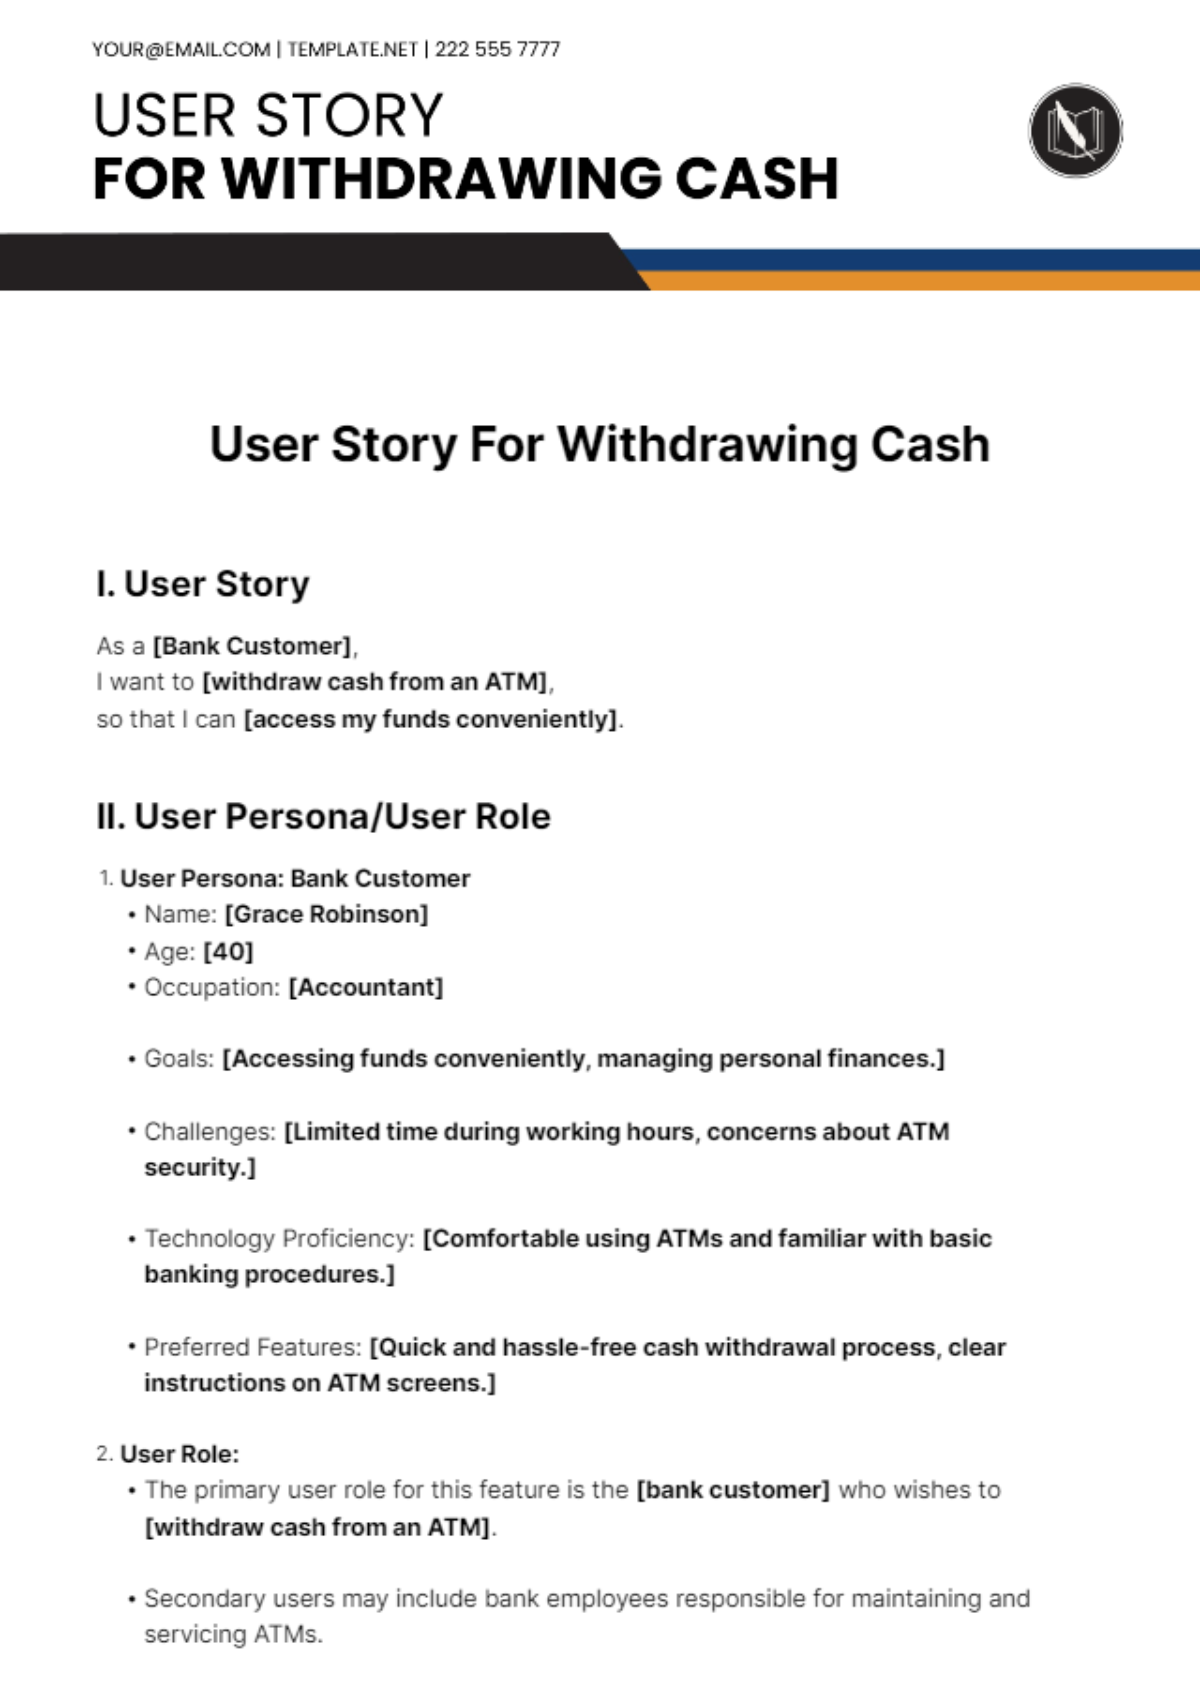 User Story For Withdrawing Cash Template